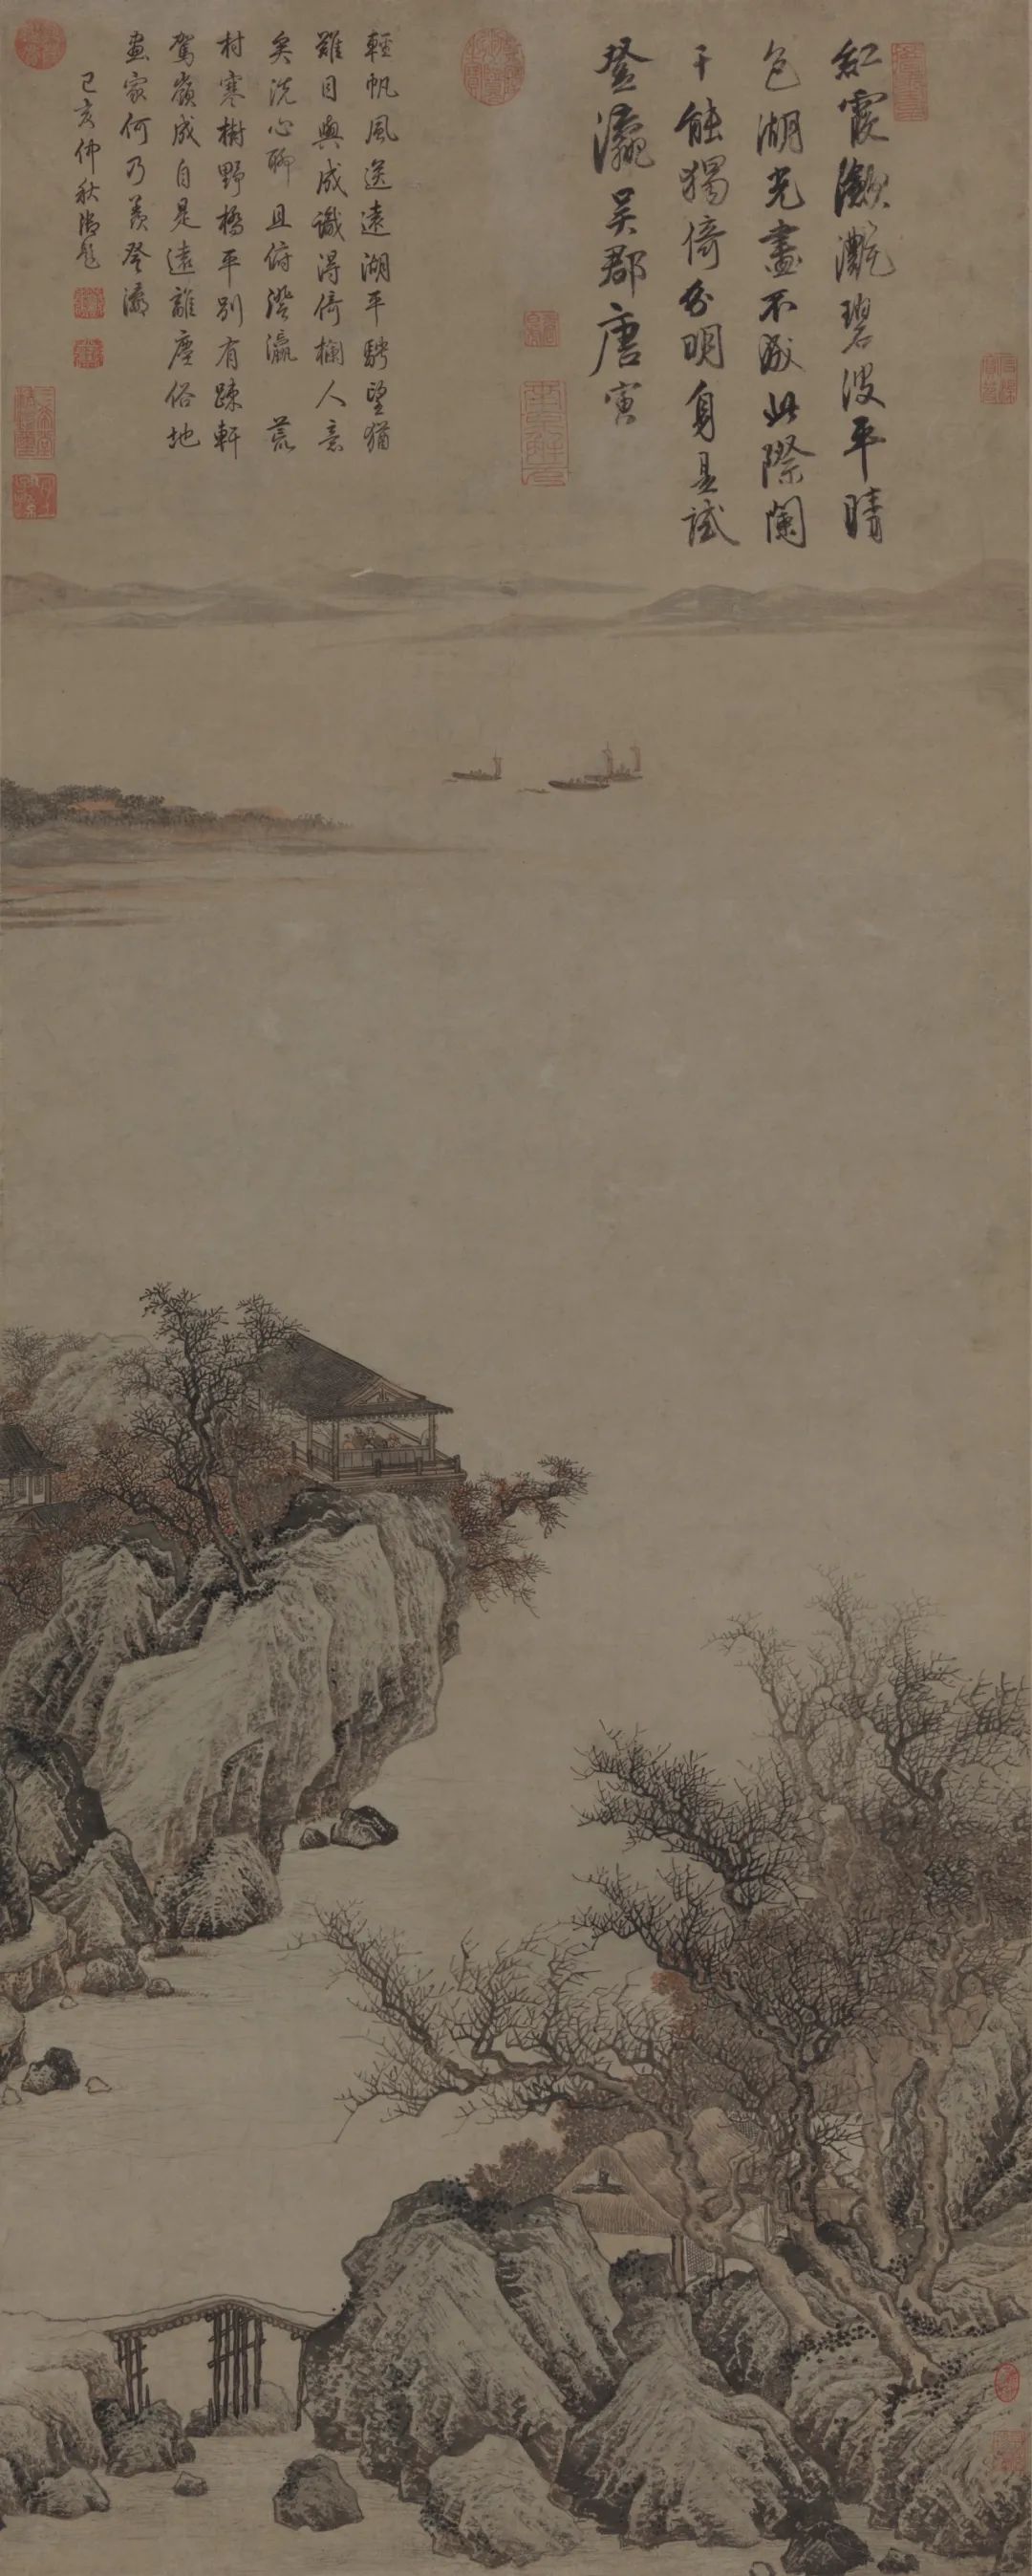 "A List of Lakes and Mountains" by Tang Yin in the Ming Dynasty